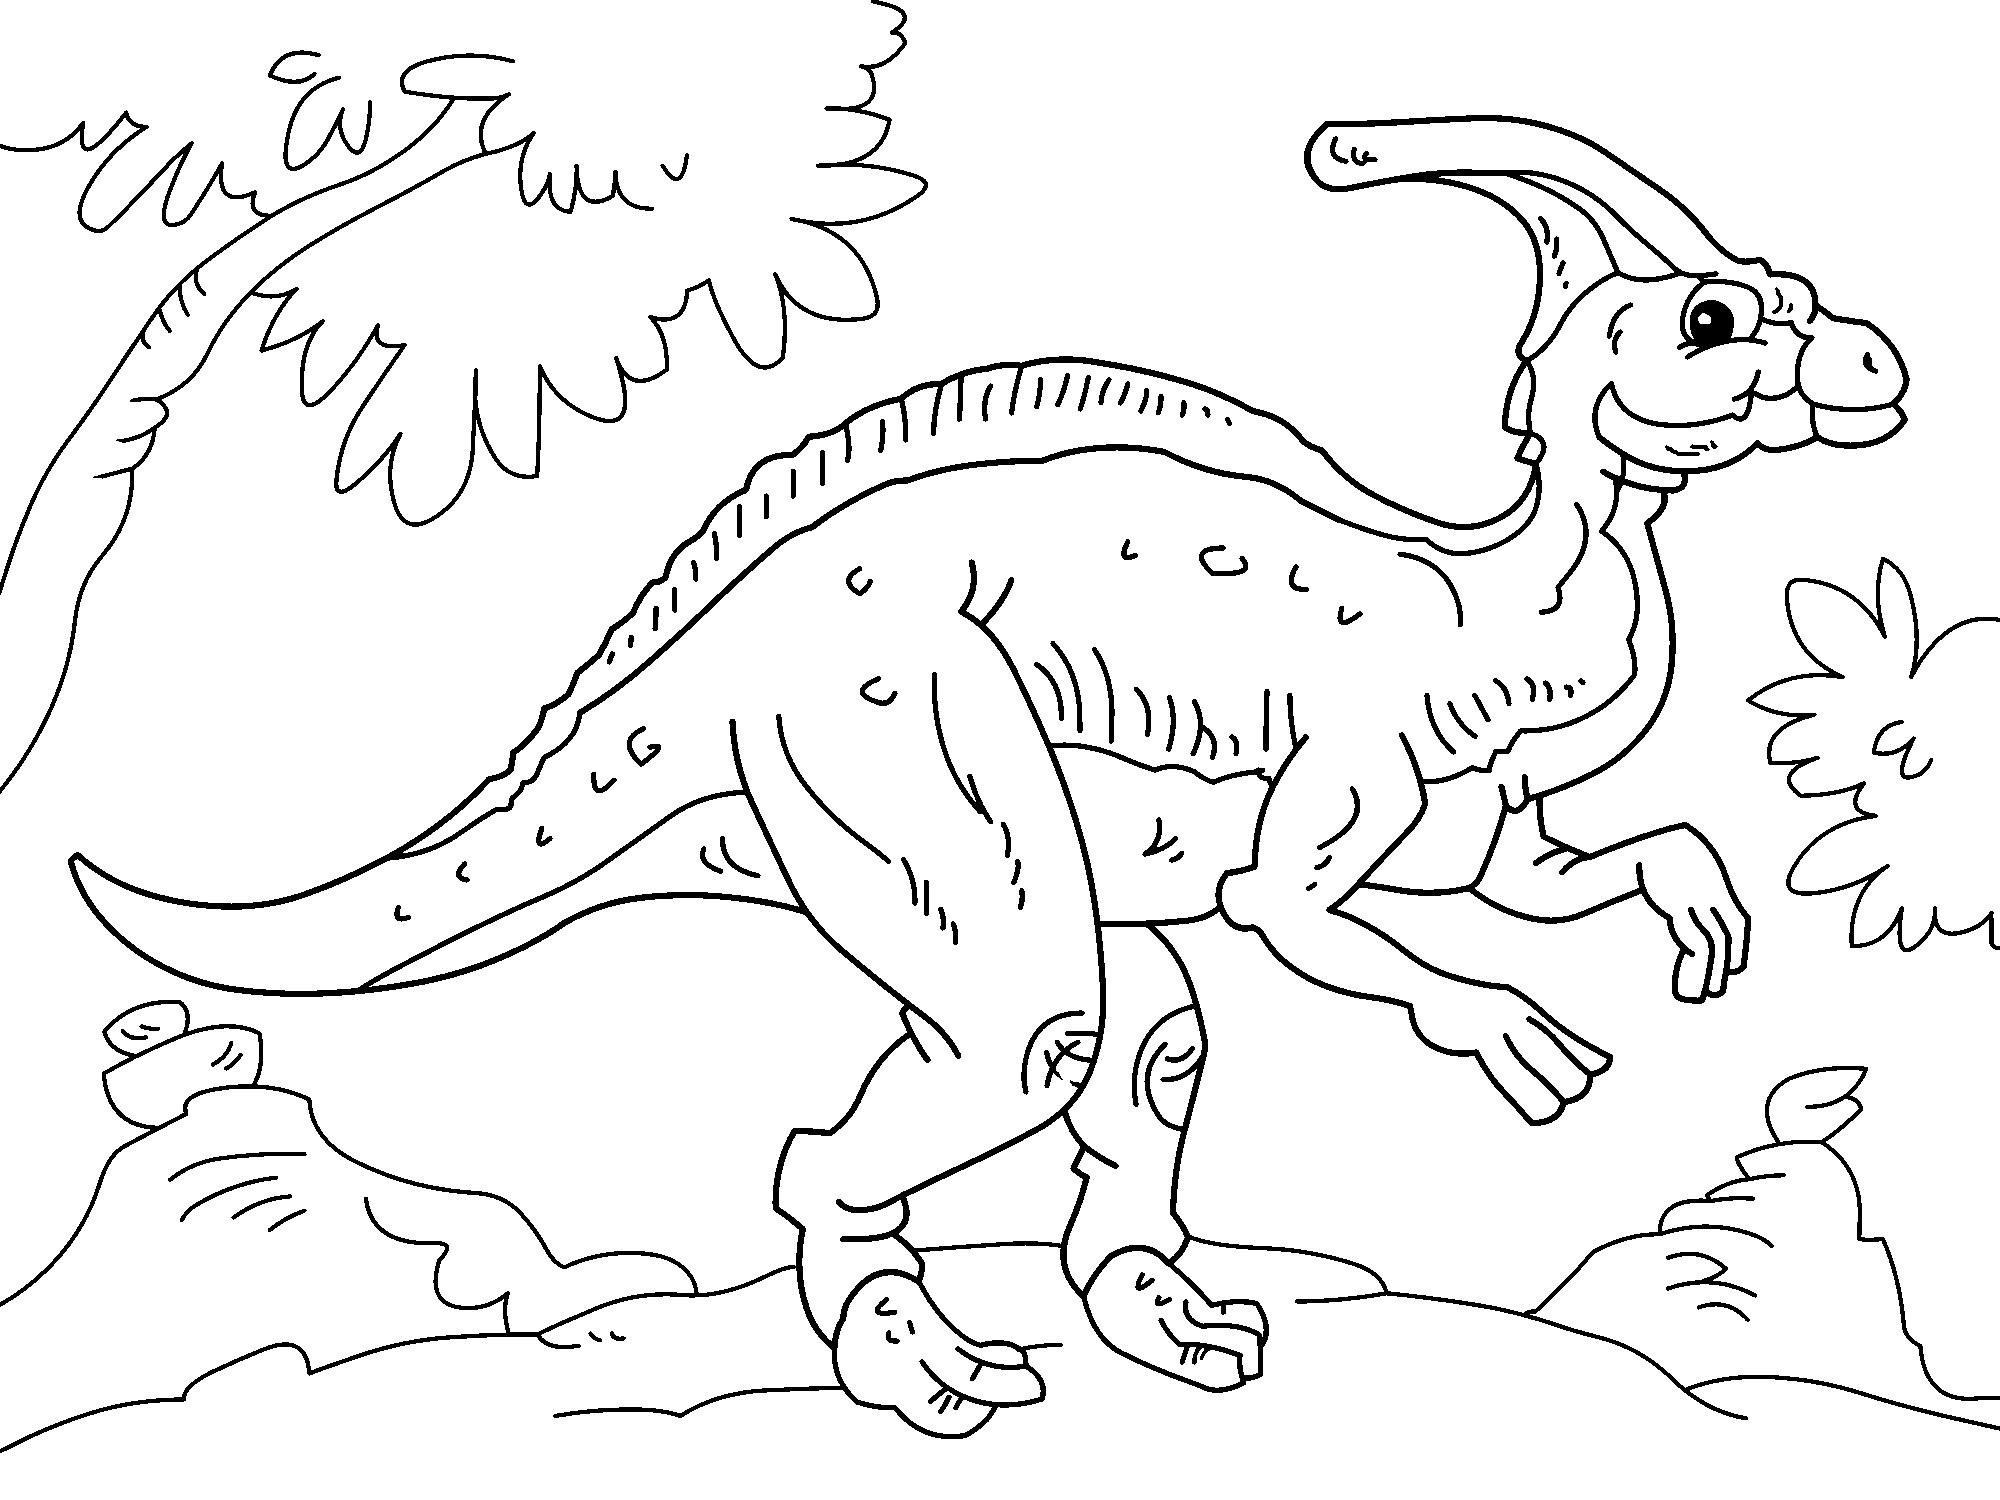 parasaurolophus coloring pages for kids